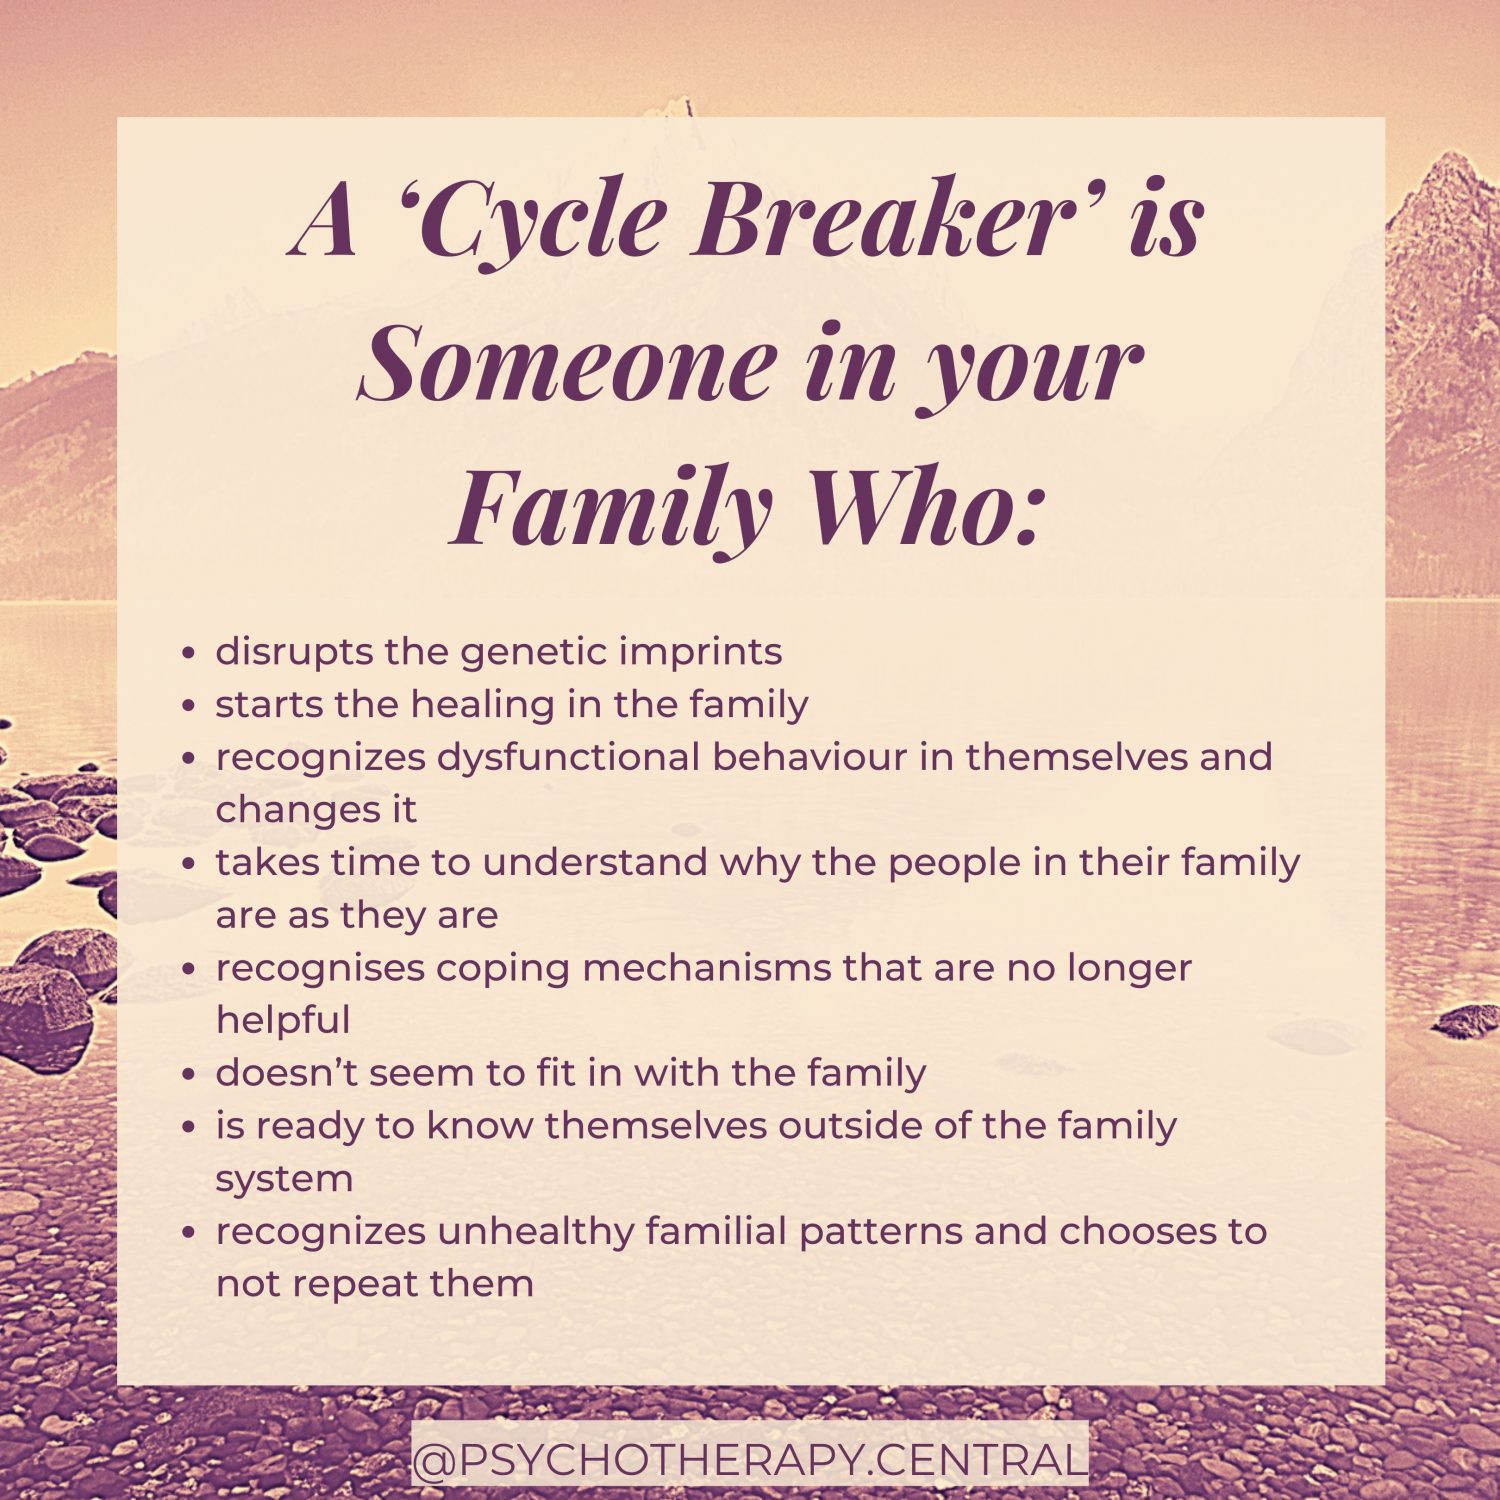 A ‘Cycle Breaker’ is Someone in your Family Who...